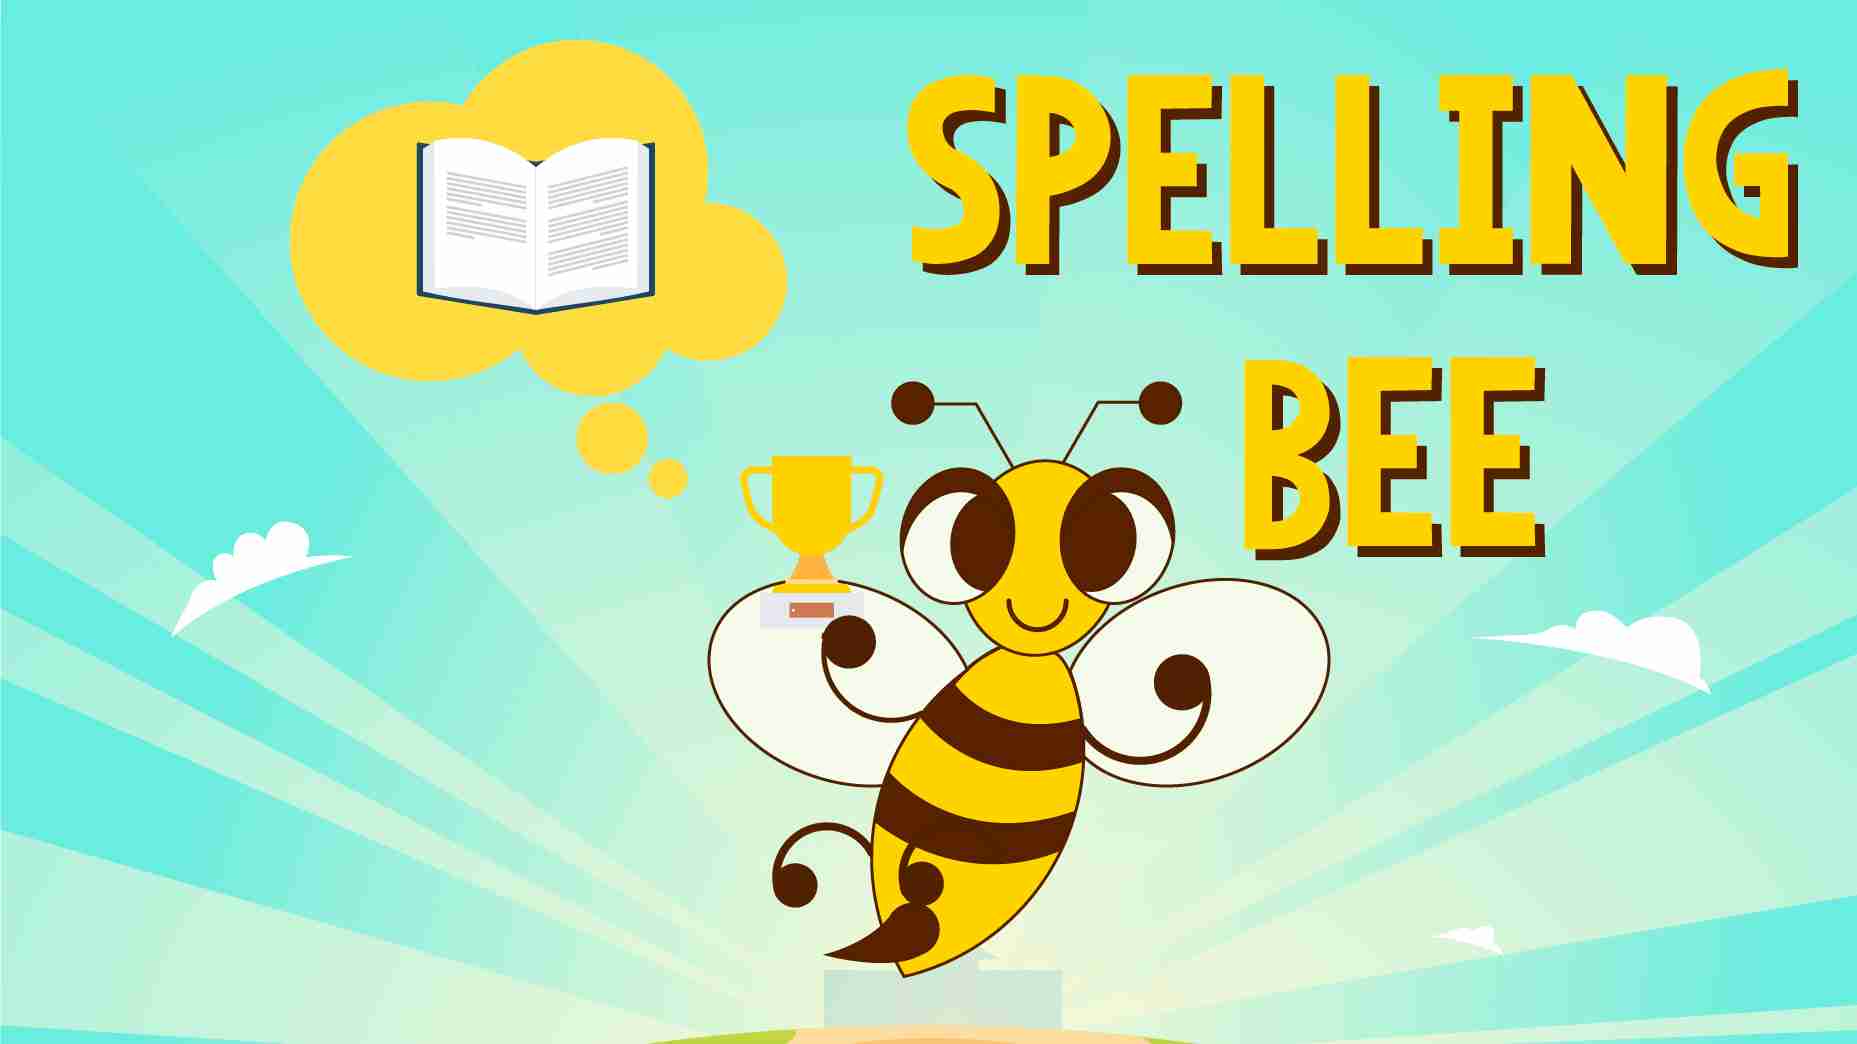 Spelling Bee practice tips and word lists for children